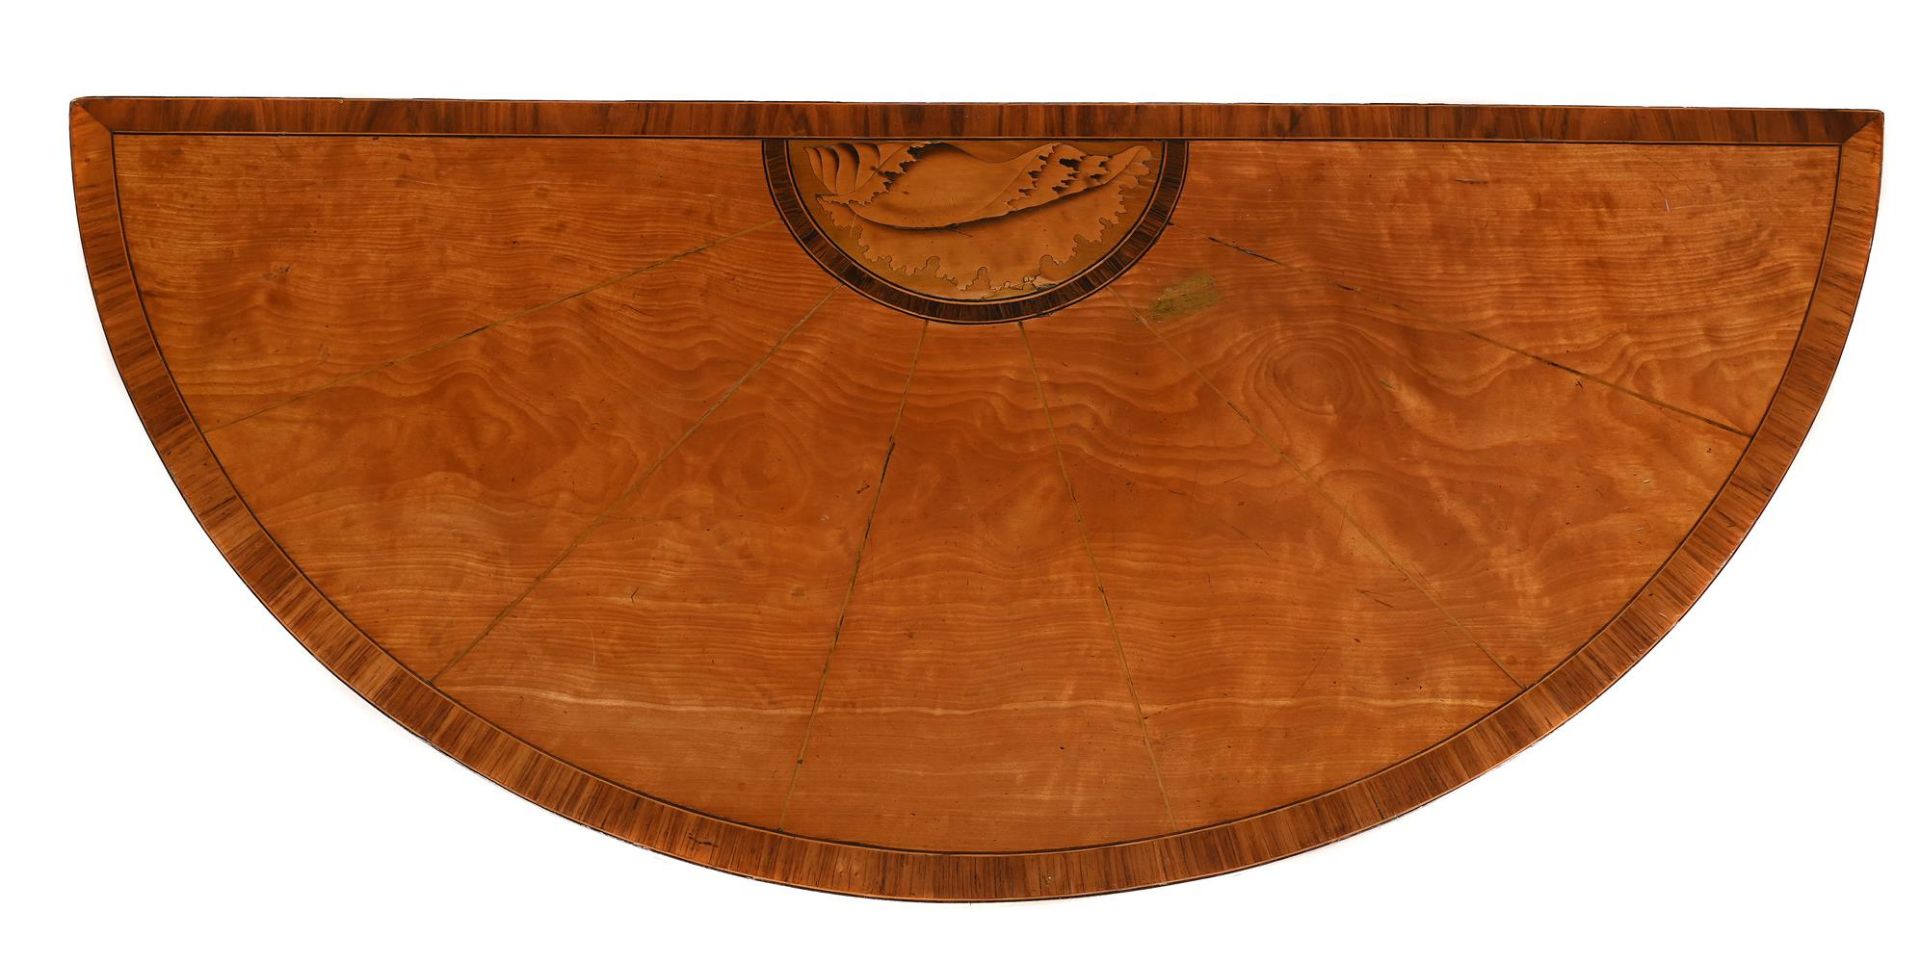 Y A GEORGE III SATINWOOD, TULIPWOOD, AND ROSEWOOD BANDED SIDE TABLE - Image 2 of 2